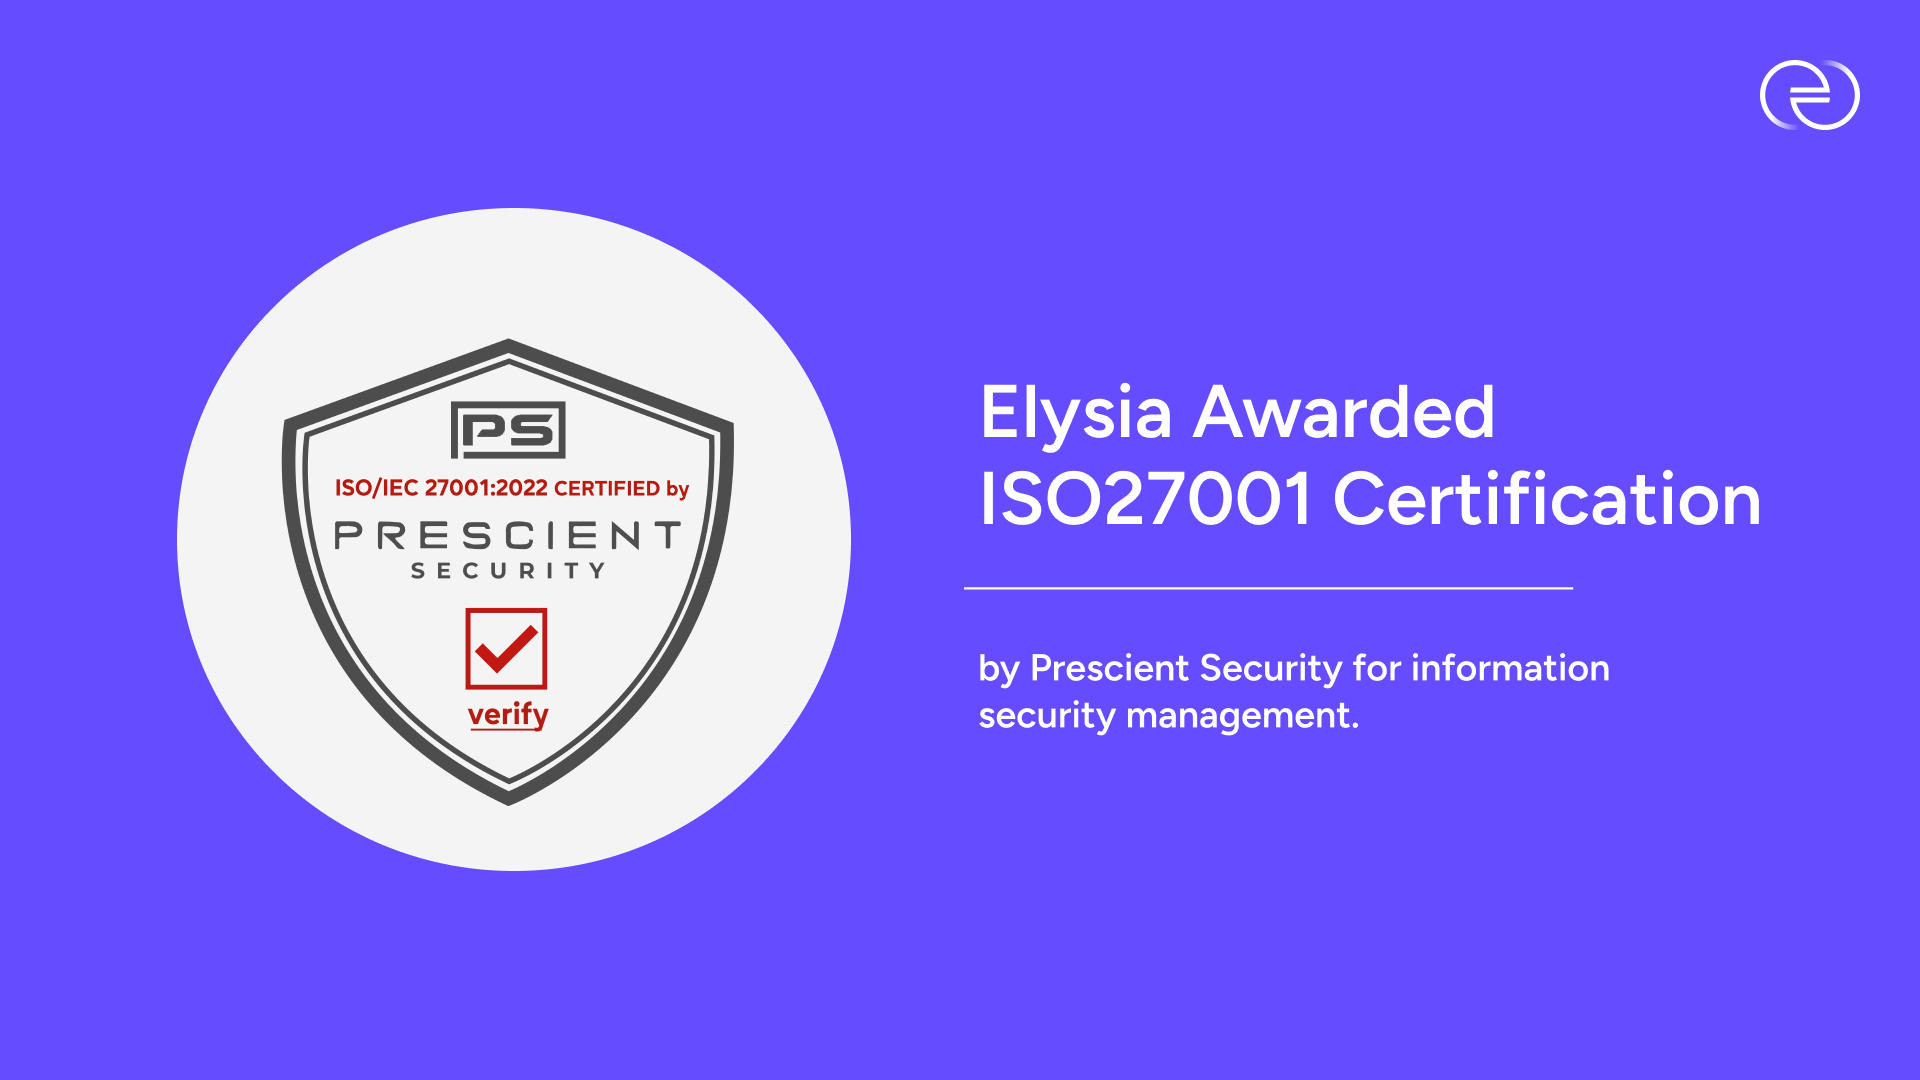 Elysia Awarded ISO27001 Certification by Prescient Security for information security management.